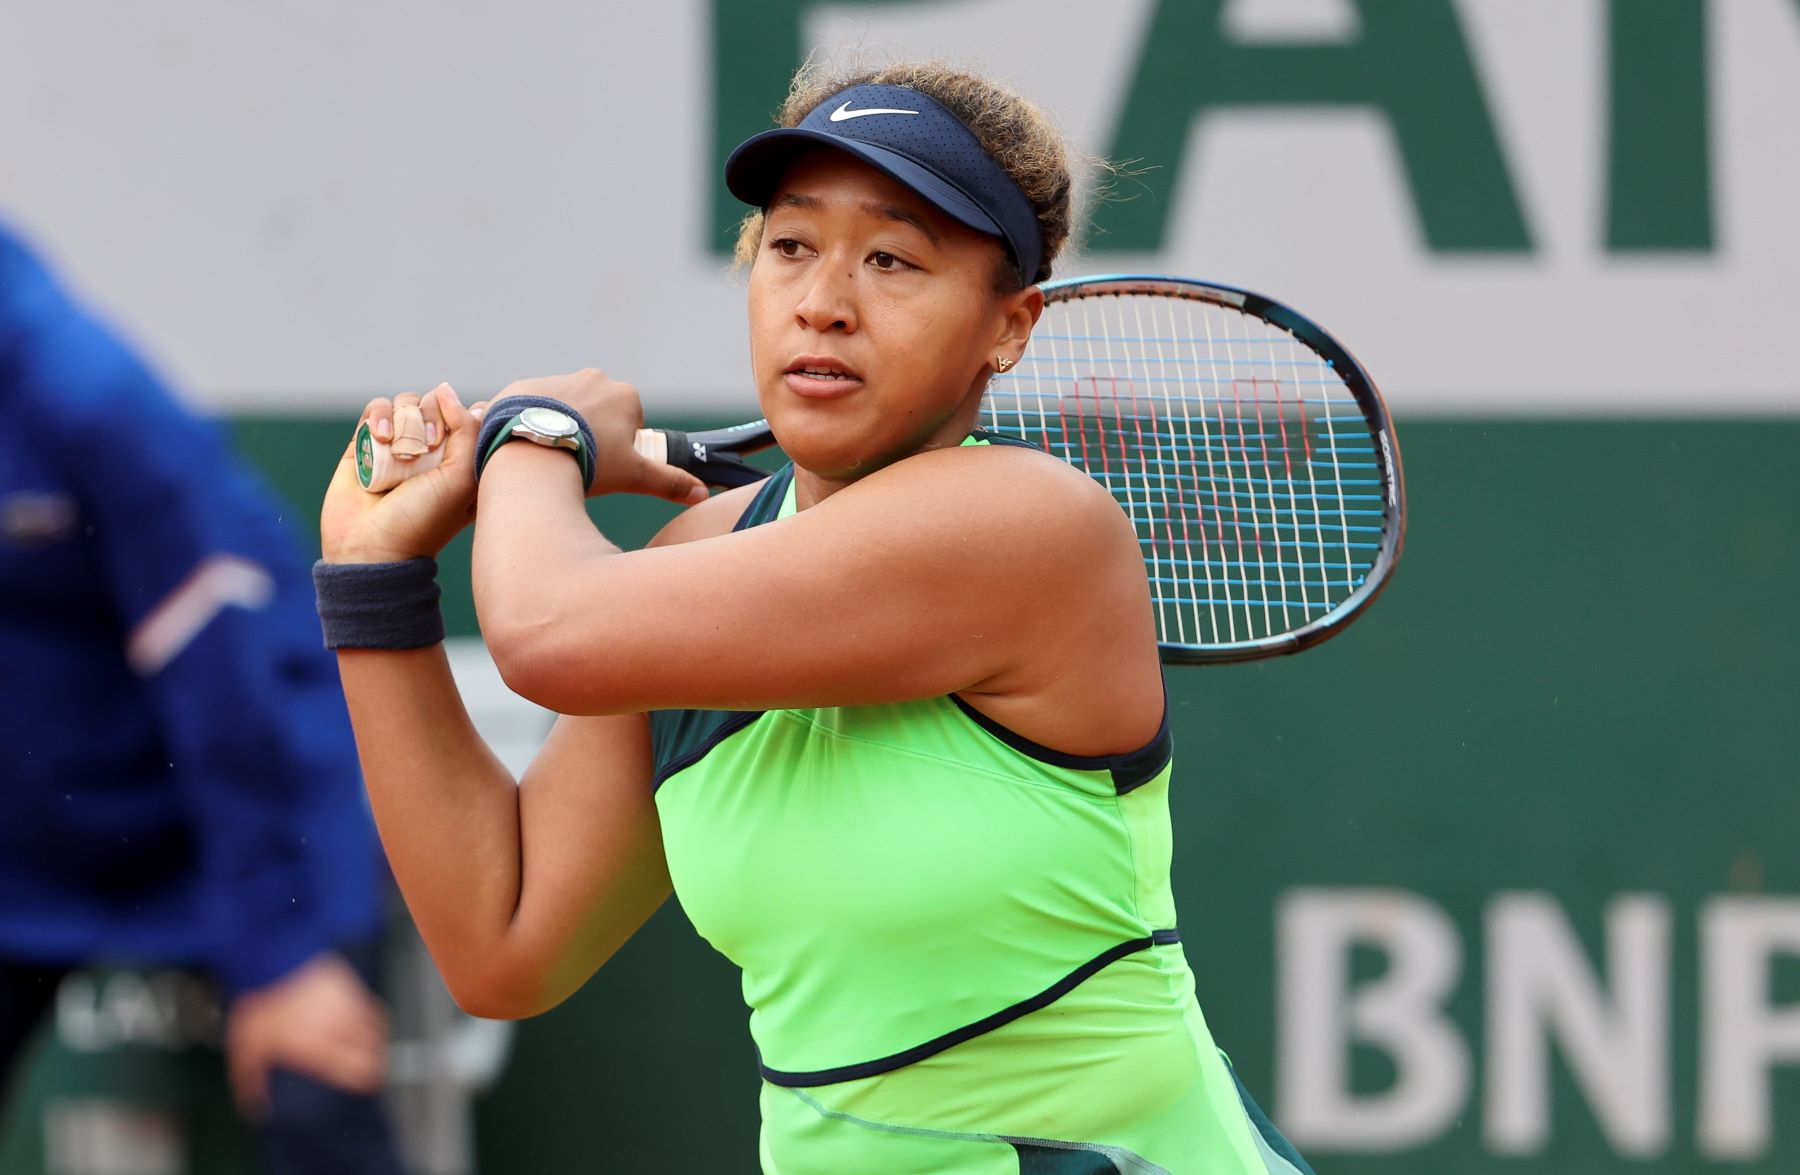 Naomi Osaka Is the World’s Highest-Paid Female Athlete, but She Just Left Her Agency in Hopes of Tripling Her Earnings